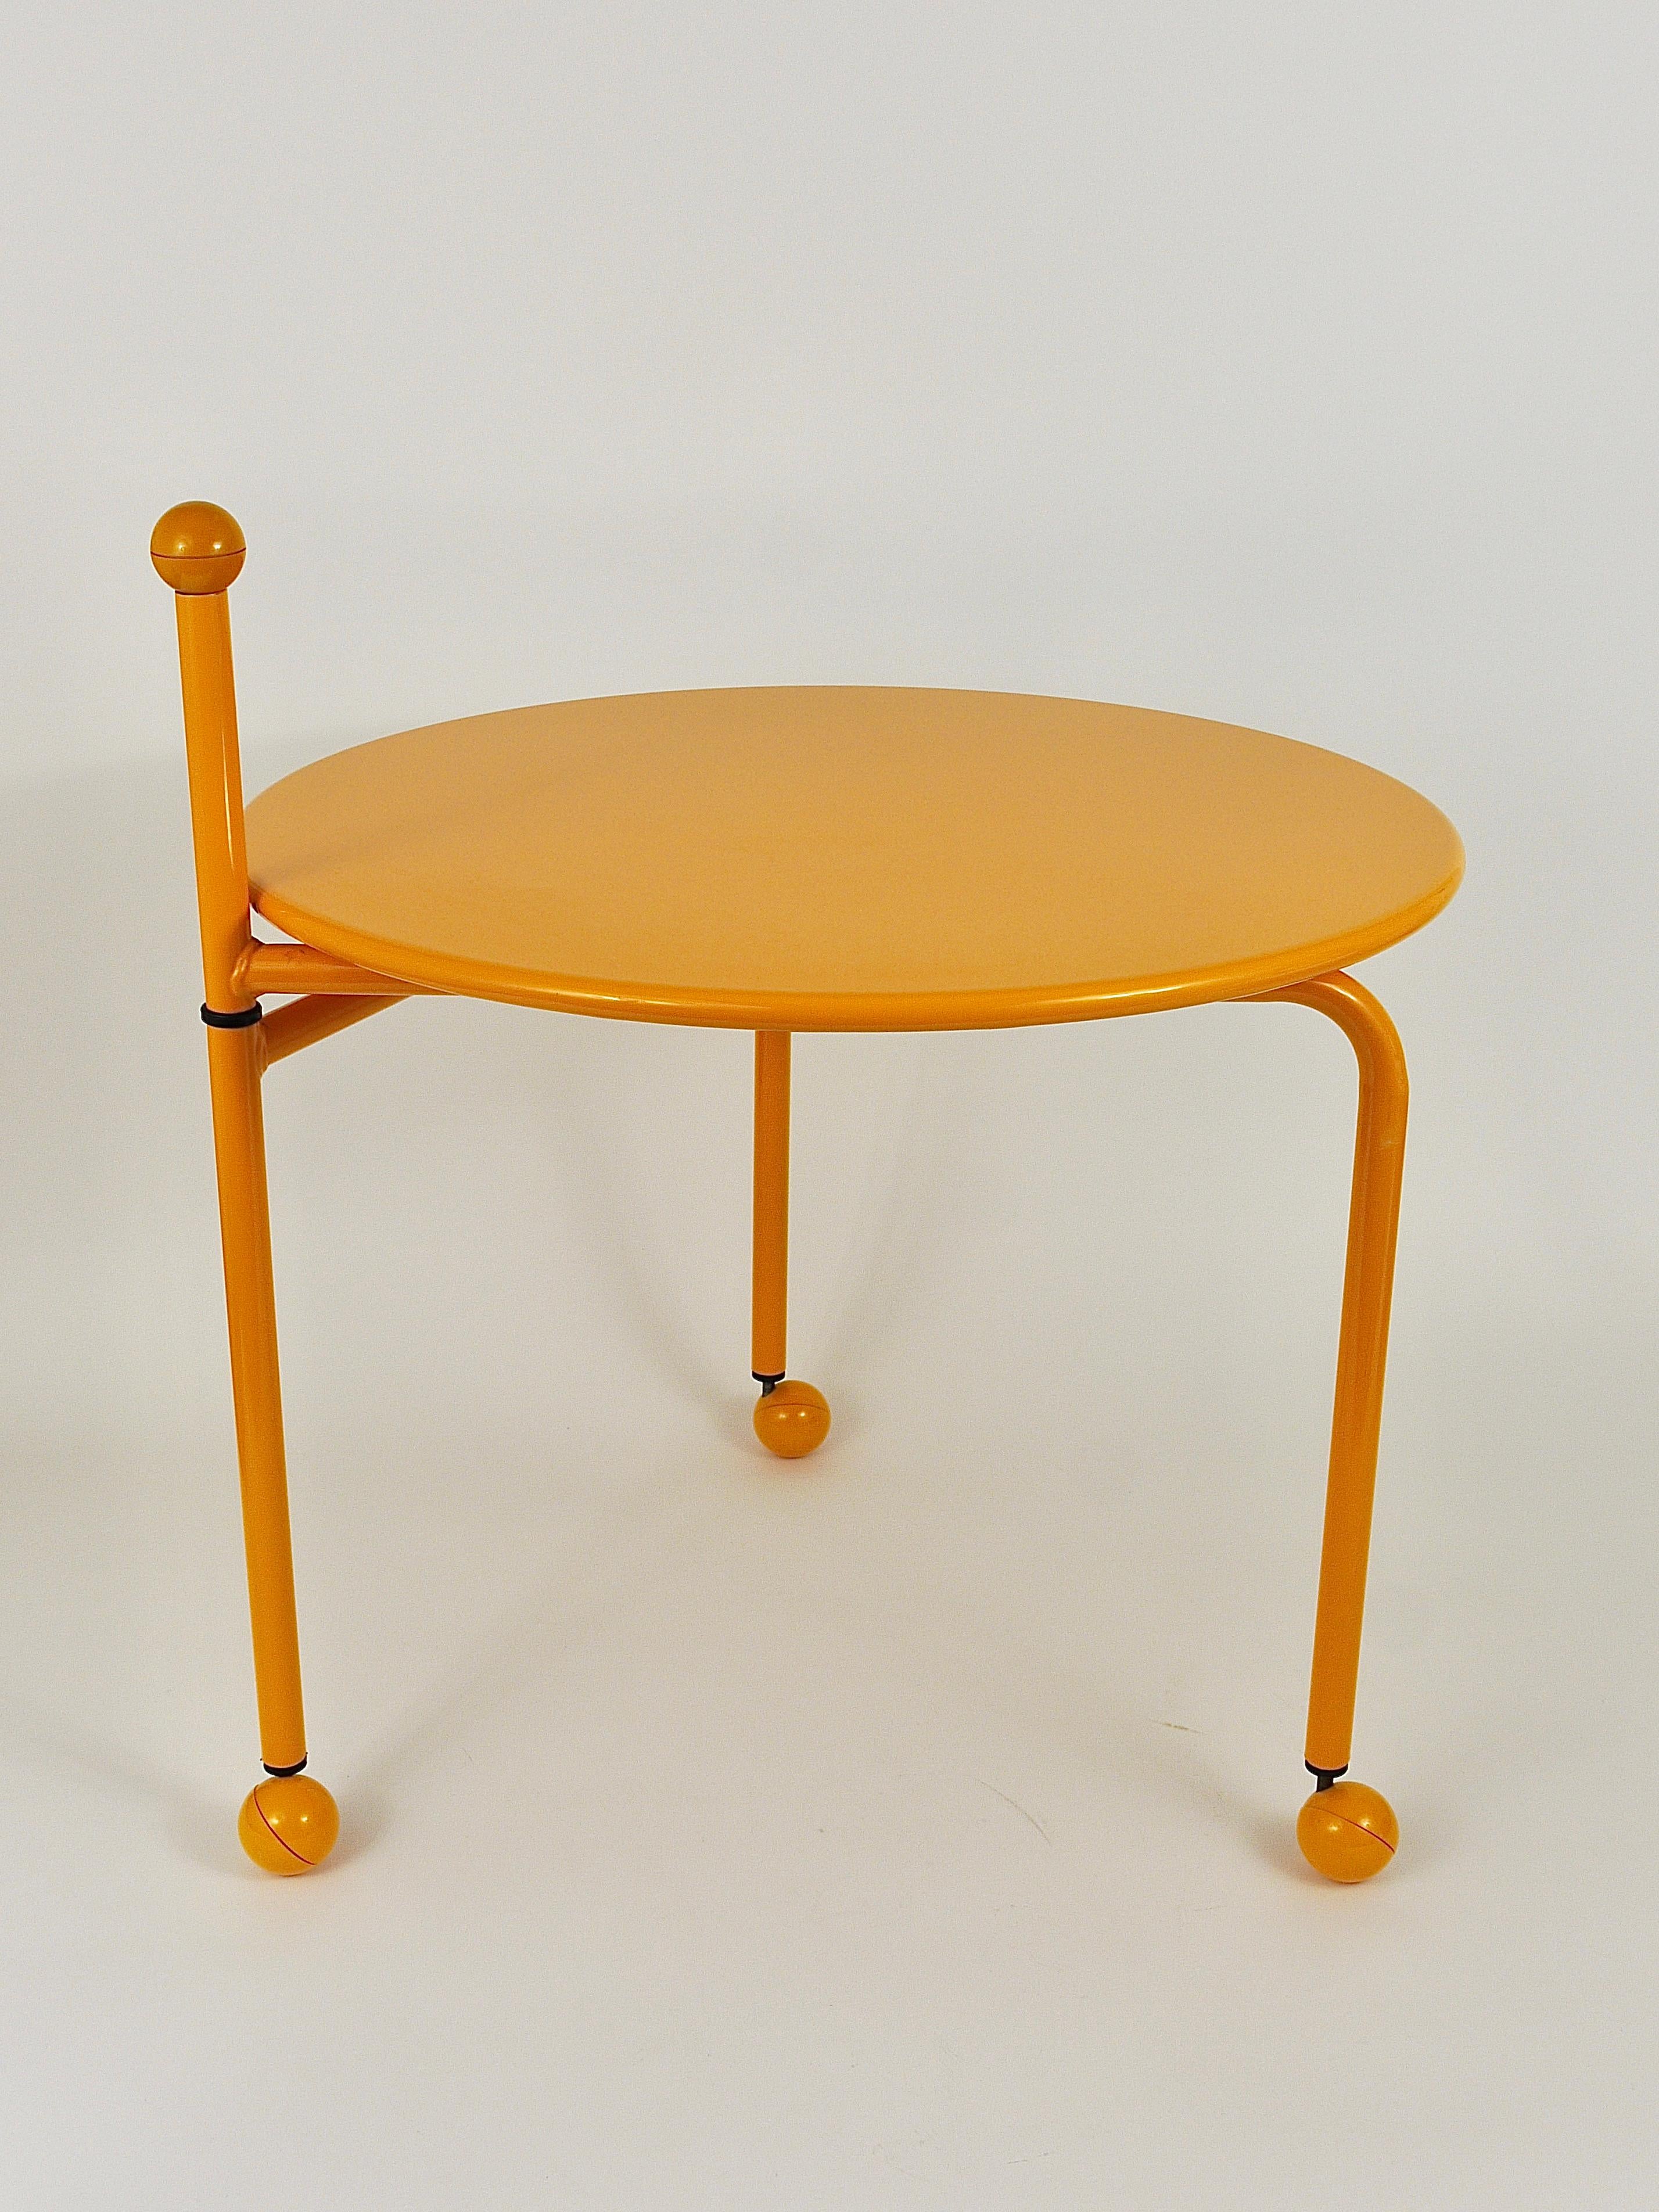 Tord Bjorklund Post-modern Side or Coffee Table, Memphis Style, Sweden, 1980s For Sale 8